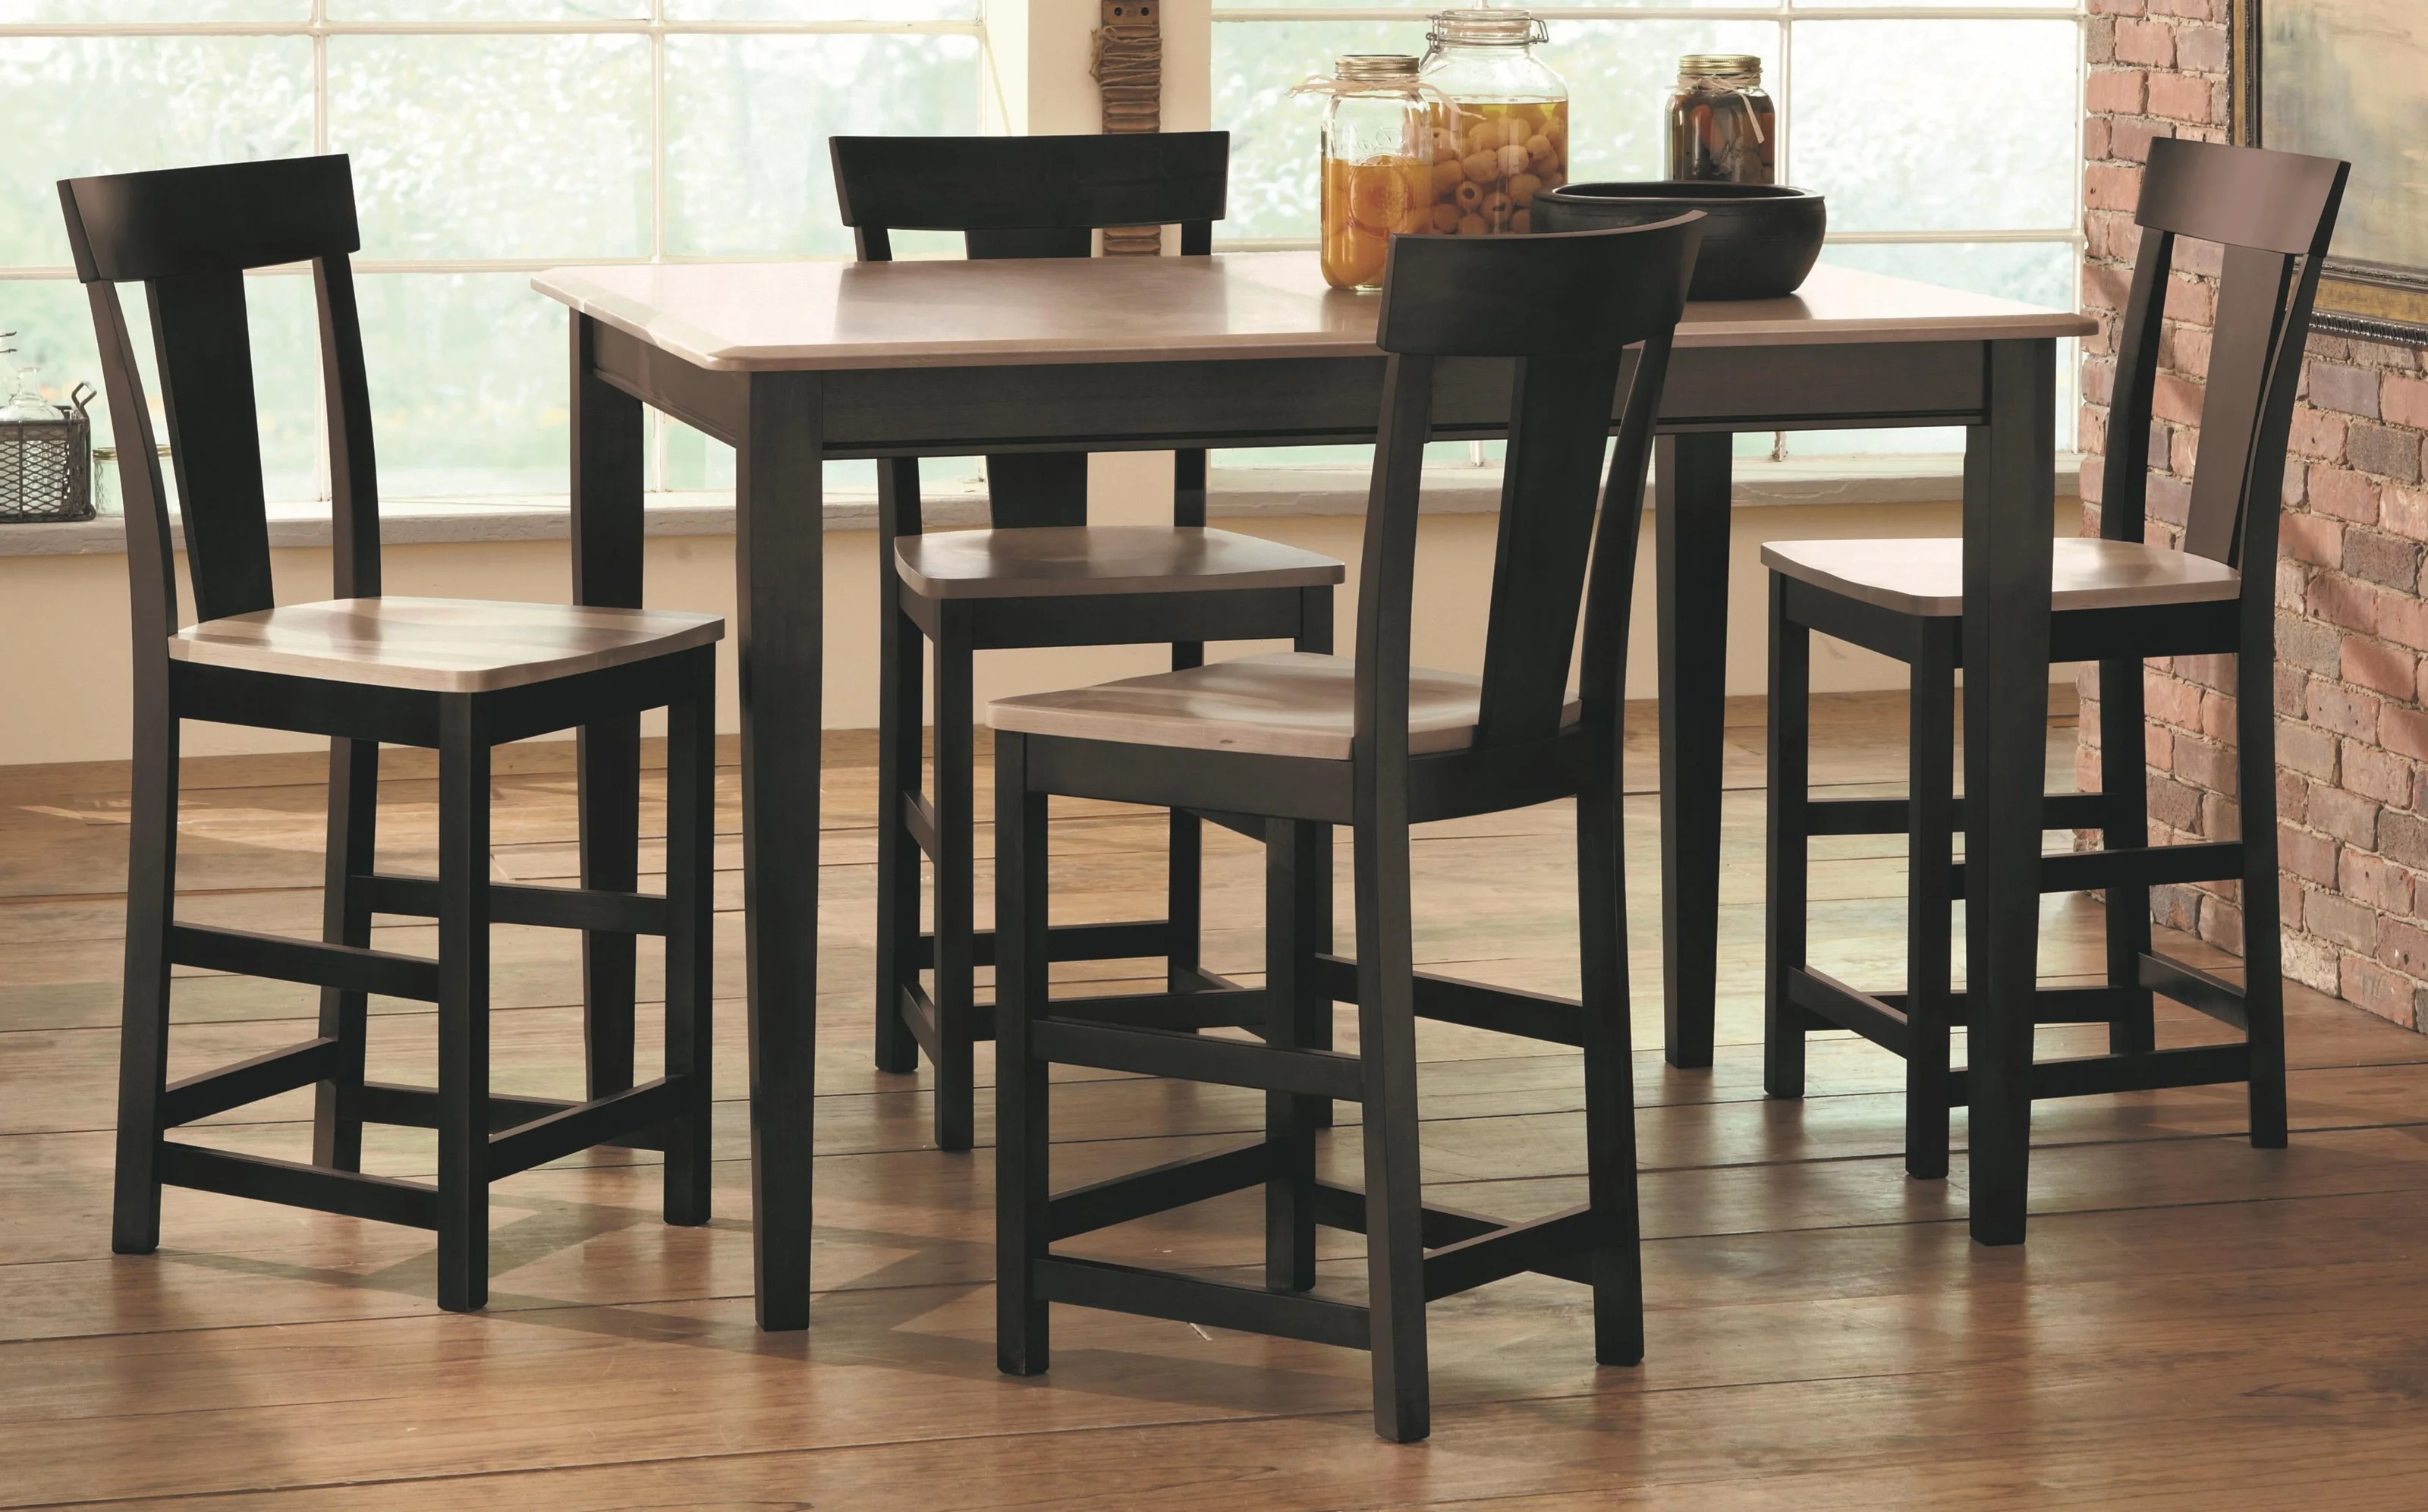 Anniversary II Dining 5-Piece Dining | | Morris Set Home 5-Piece Sets 374366164